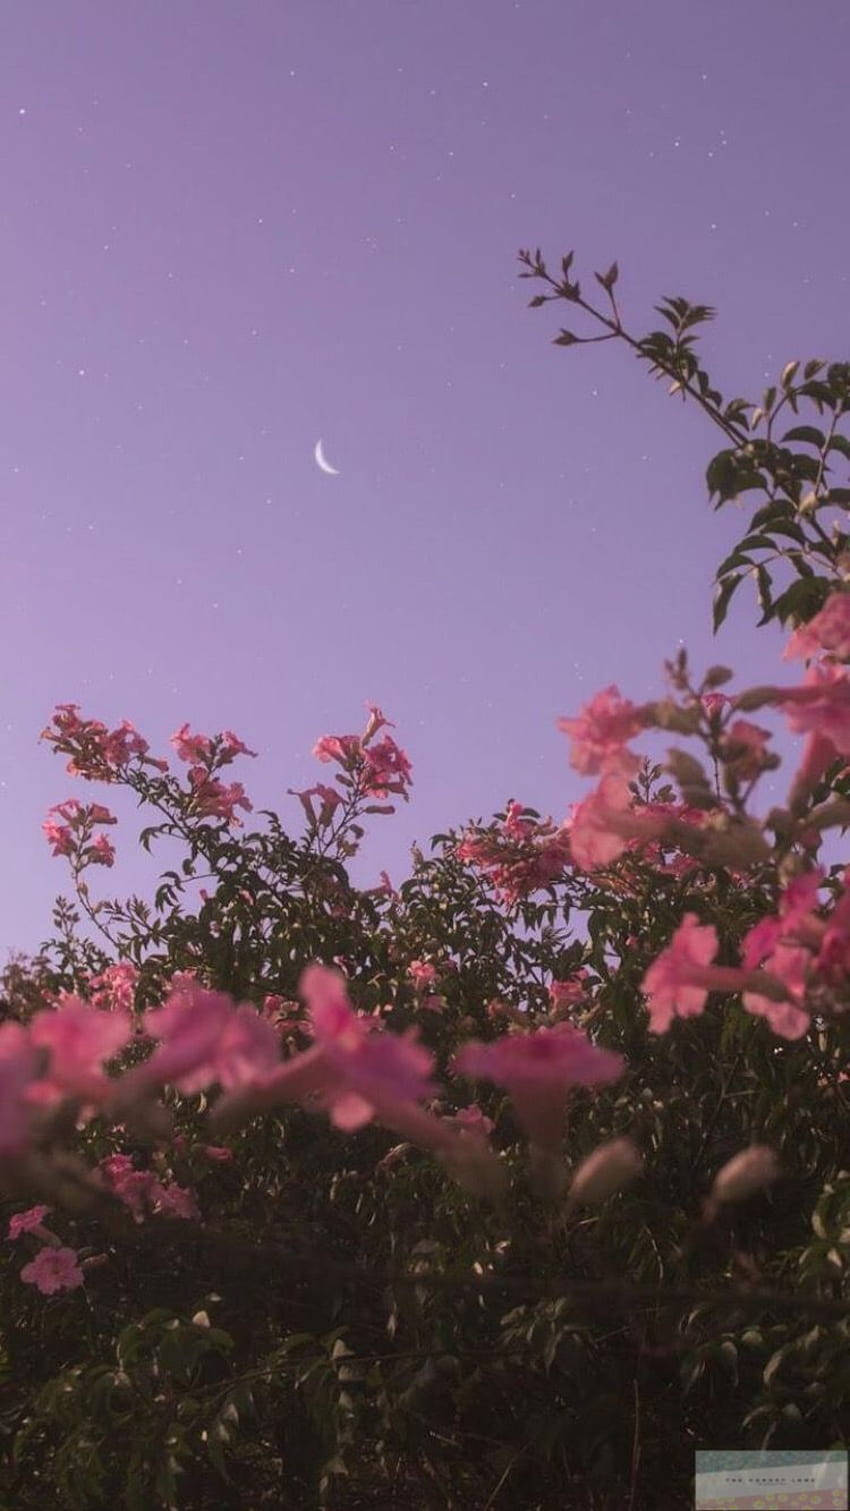 "Admire the serene beauty of the pink flower against the sky, backdrop providing an amazing aesthetic to your iPhone X." Wallpaper